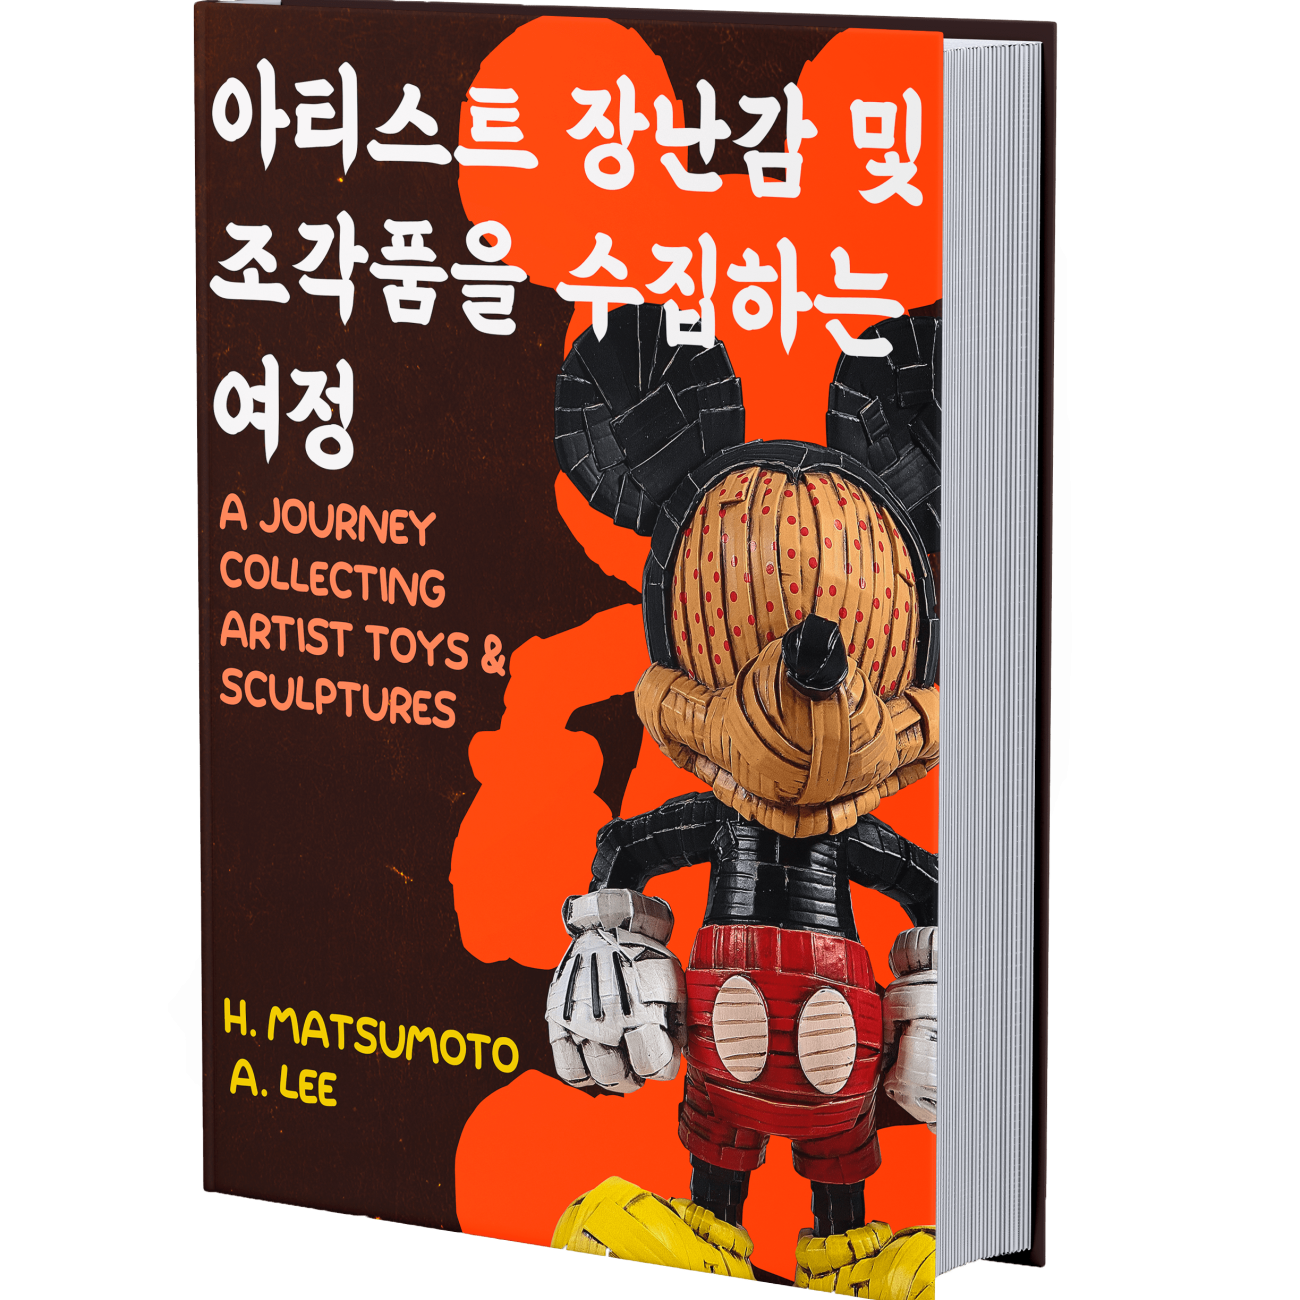 A-Journey-Collecting-Artist-Toys-Scuptures-Nonsuch-Media-Korean